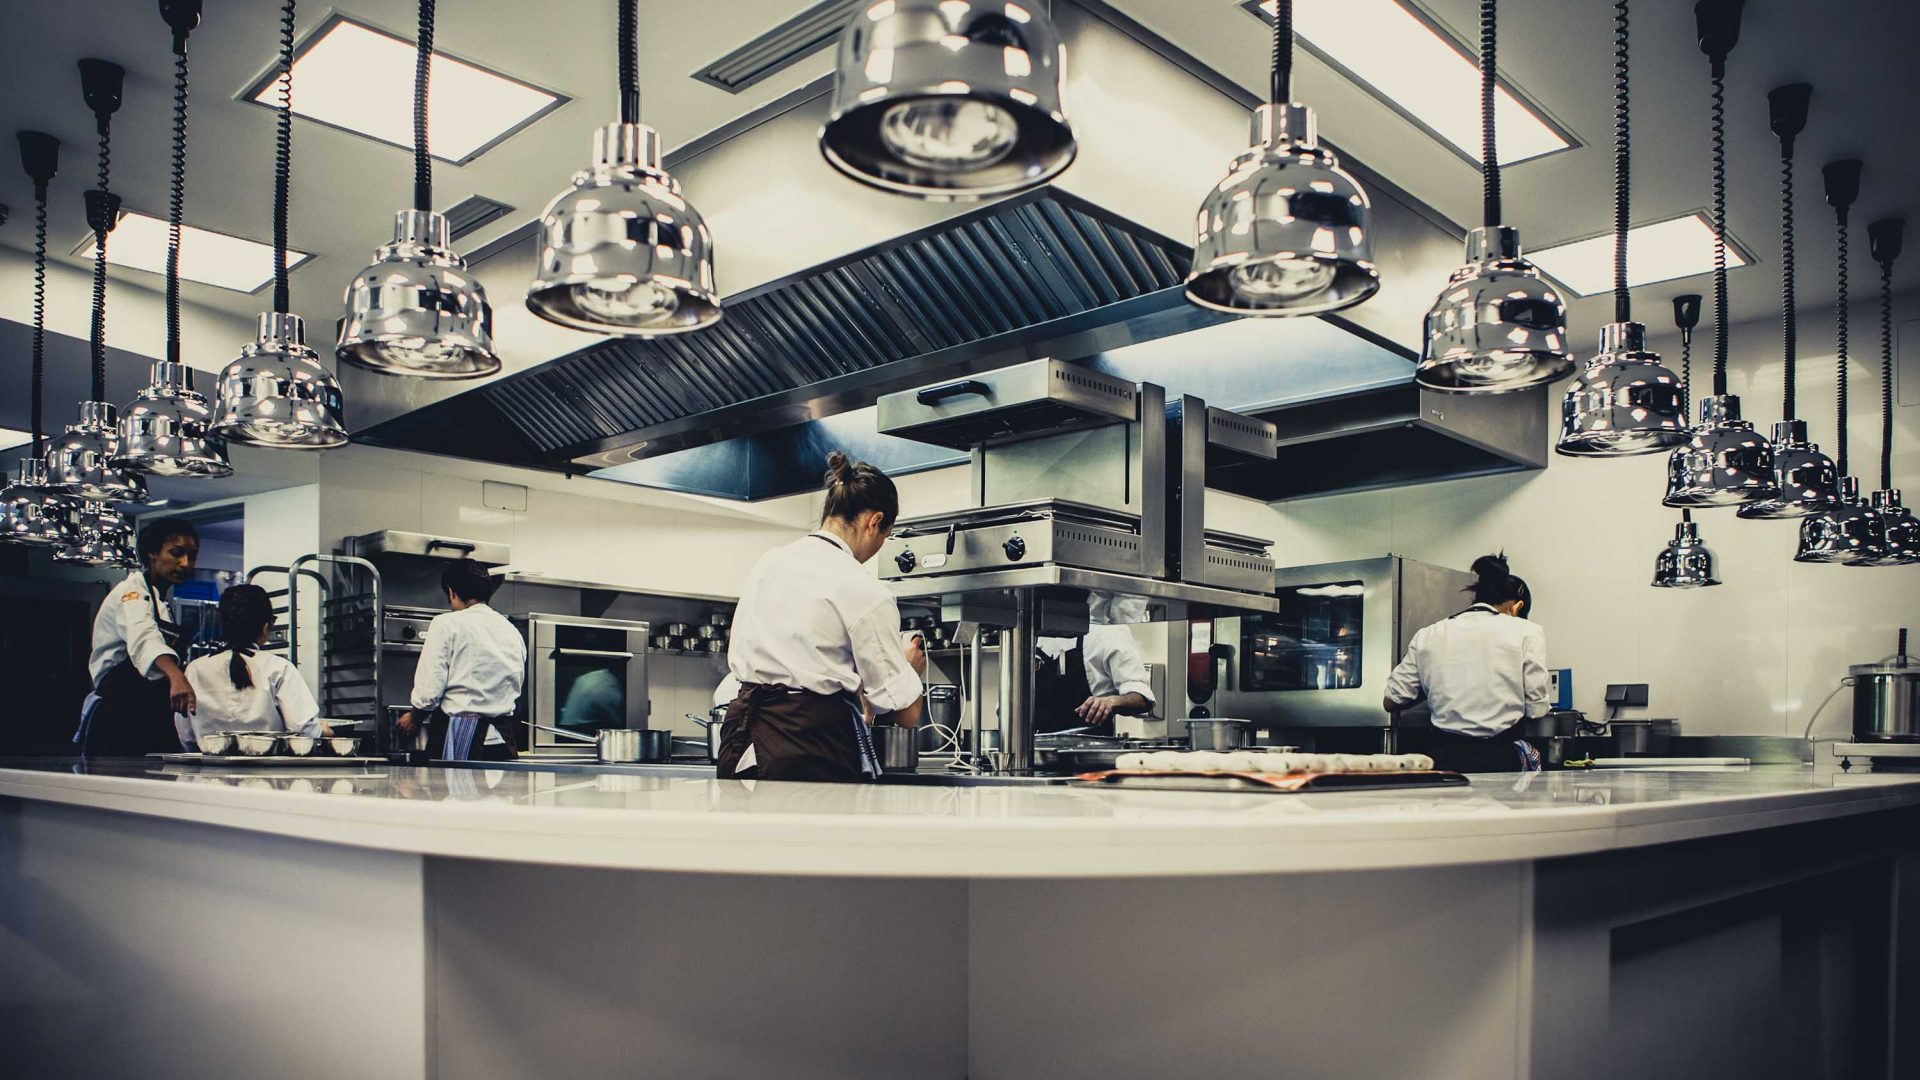 Chefs work in the shiny kitchen at Mugaritz.